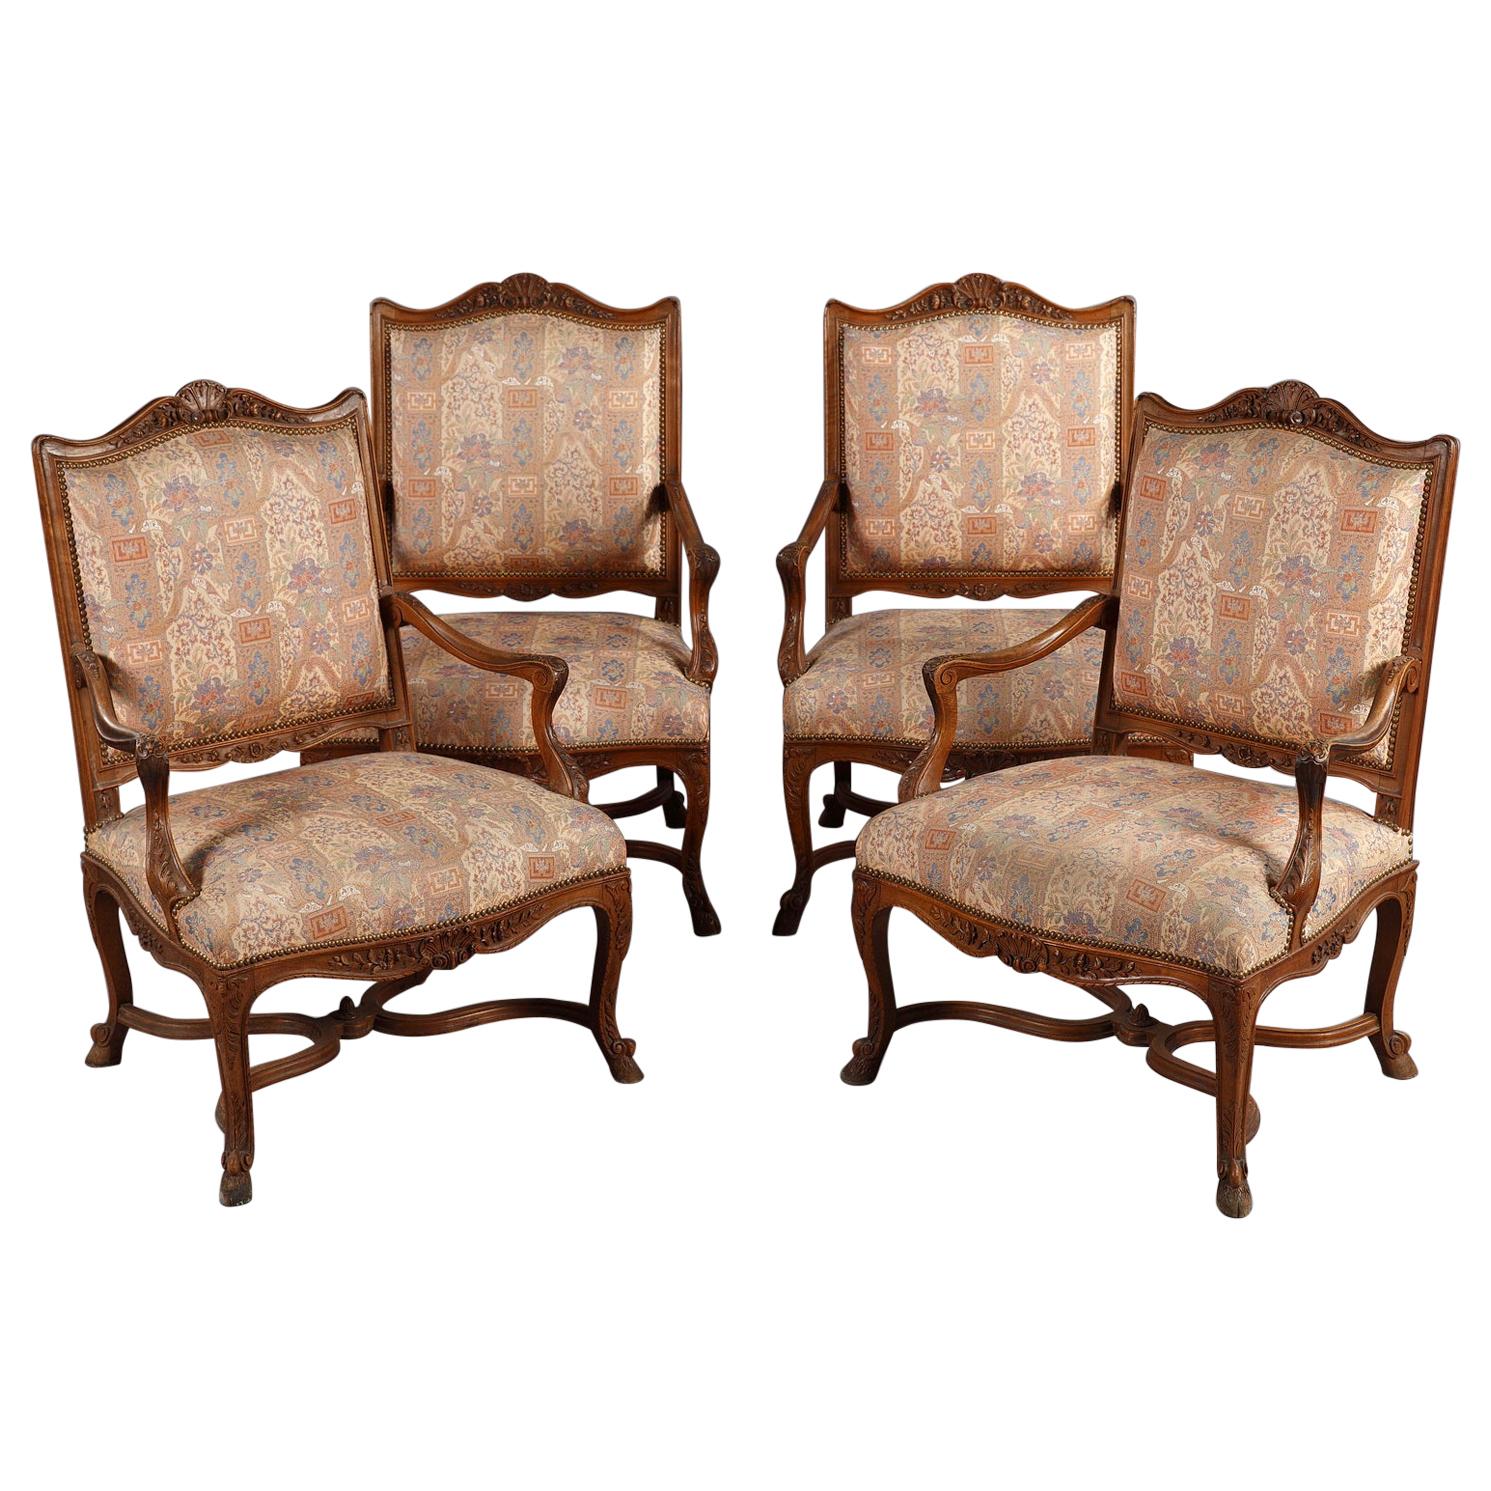 Set of Eight Régence Style Seats, France, Late 19th Century